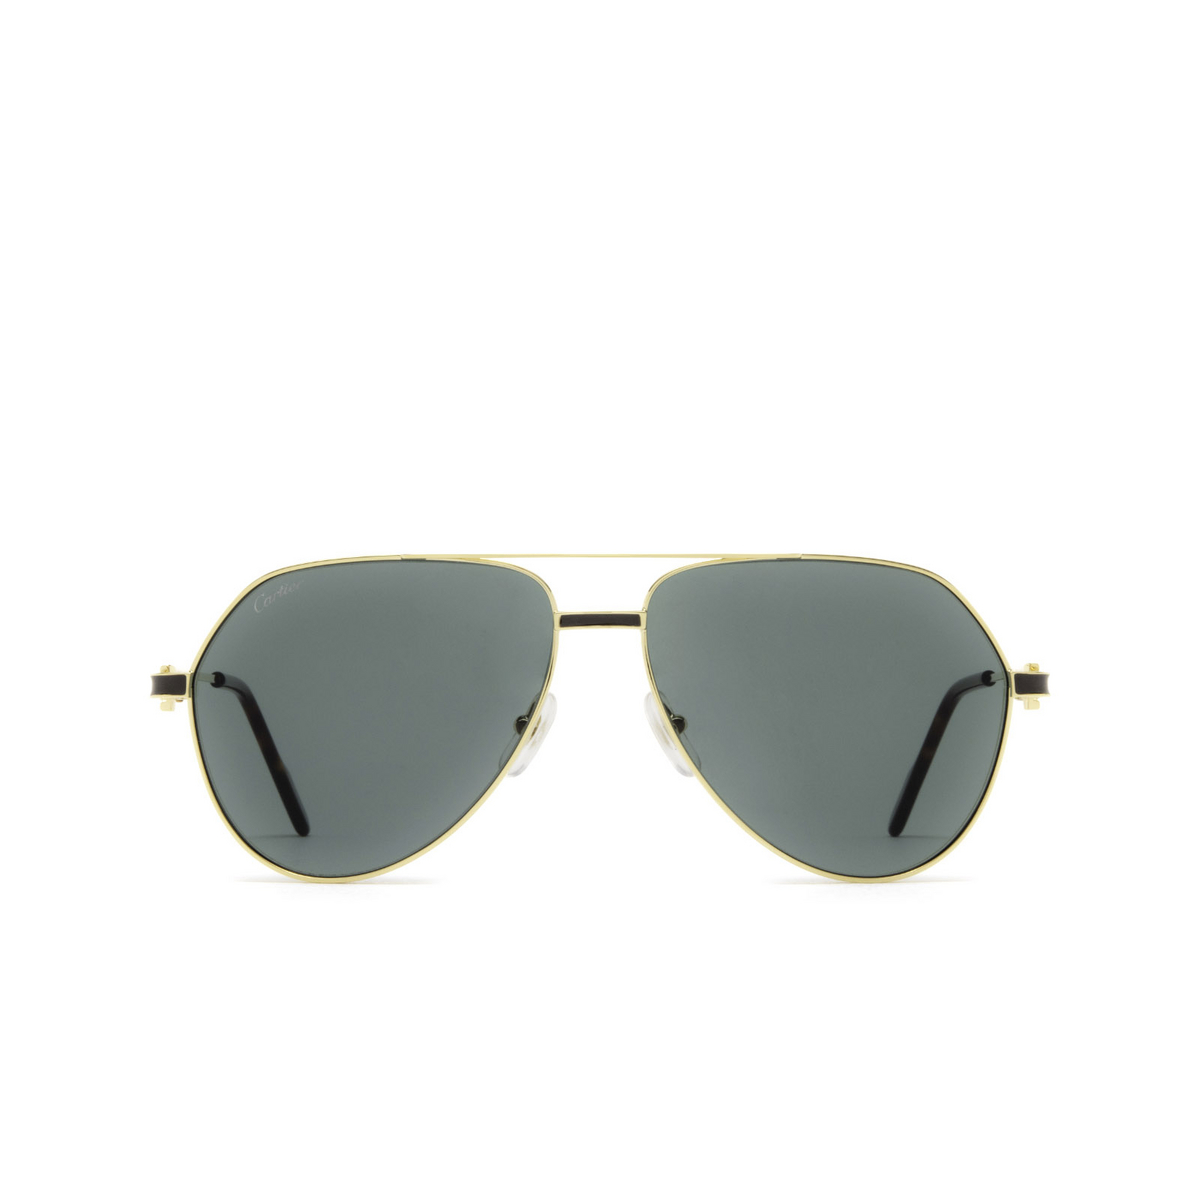 Cartier® Aviator Sunglasses: CT0334S color Gold 002 - front view.